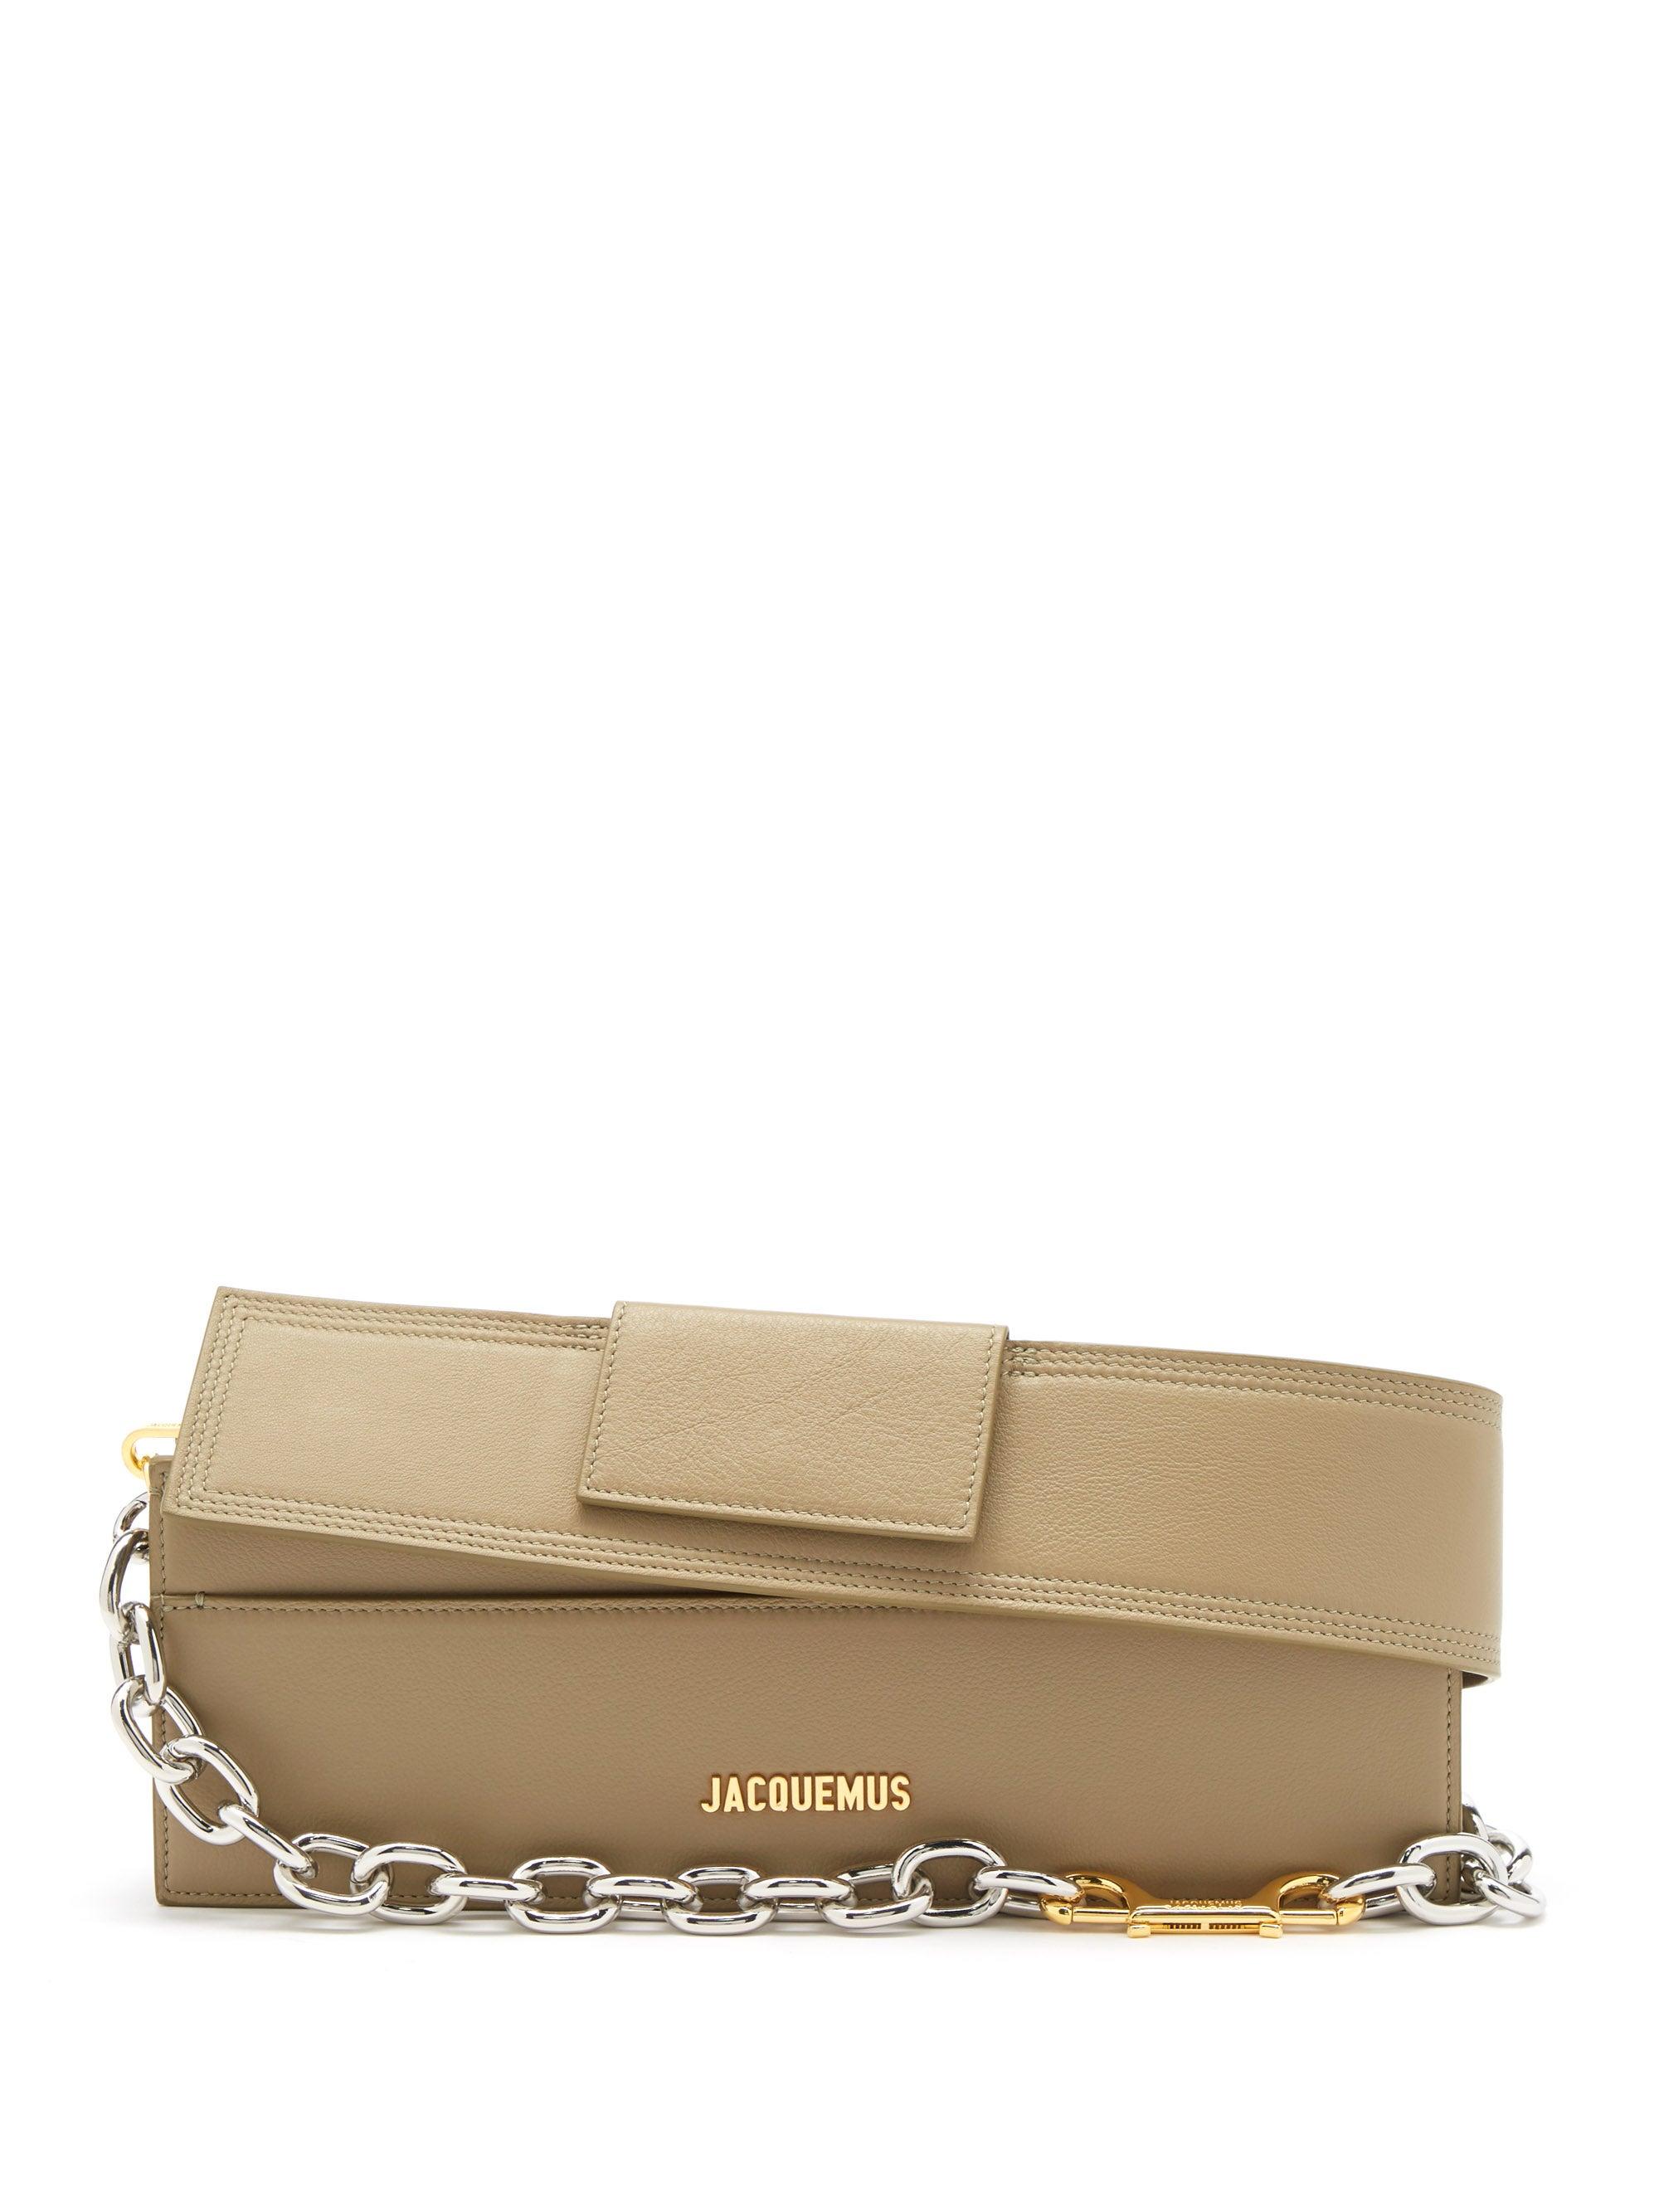 Jacquemus Cuicui Small Leather Shoulder Bag | Lyst